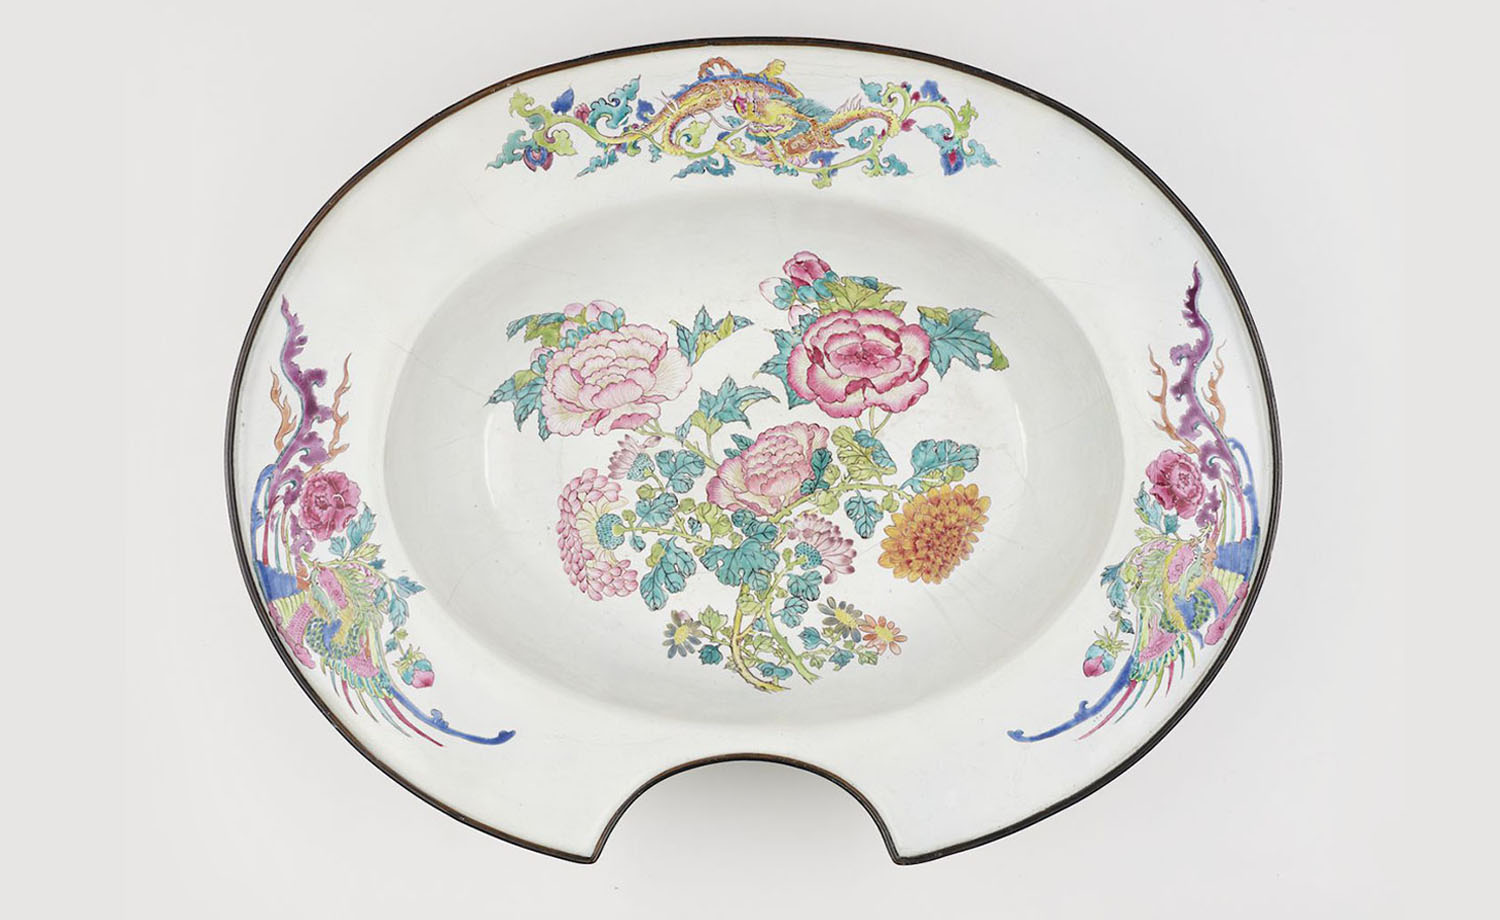 Barber's basin with floral design in painted enamels